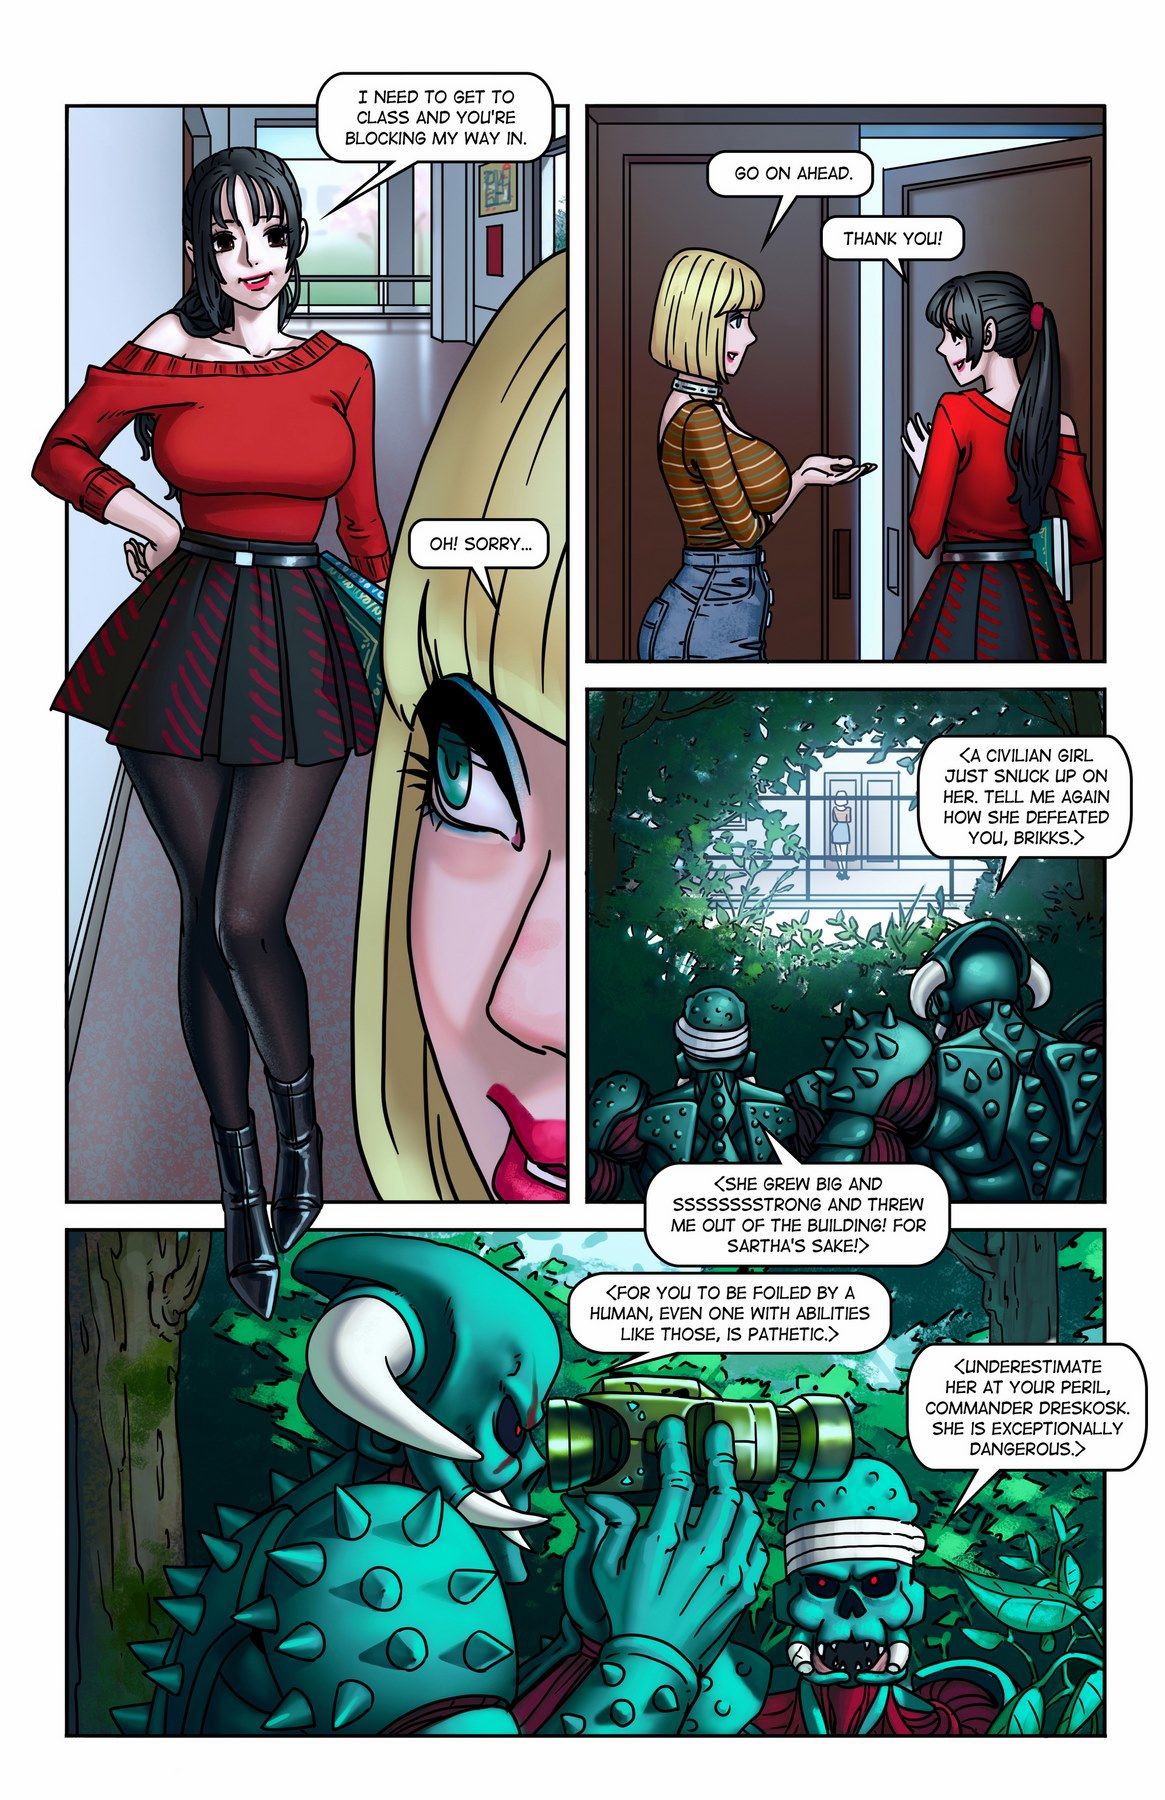 Maid of Honor Issue 02 MuscleFan page 5